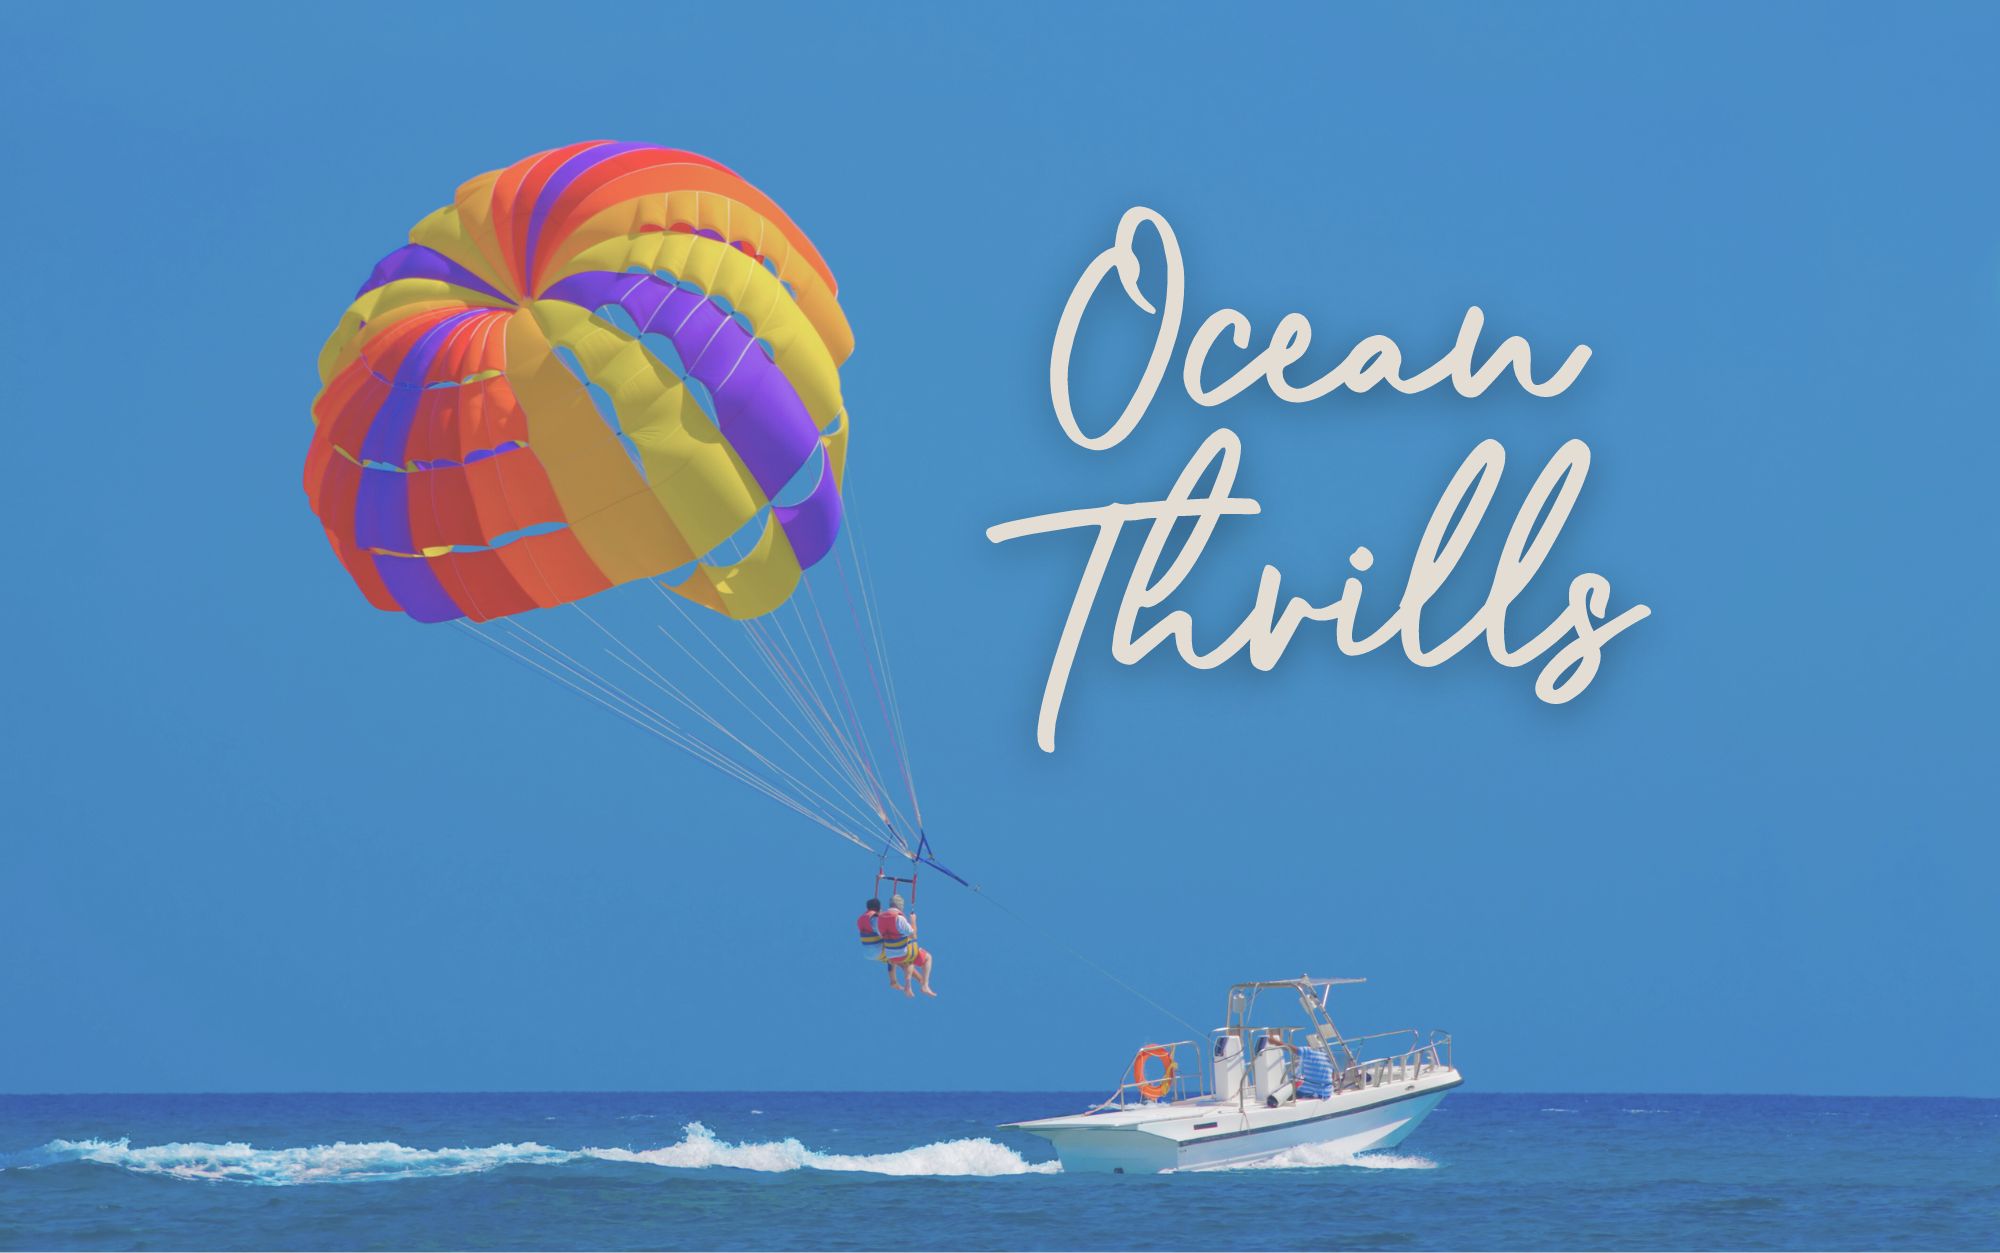 An image attempting to show that we have <b>Ocean Thrills | $175</b>